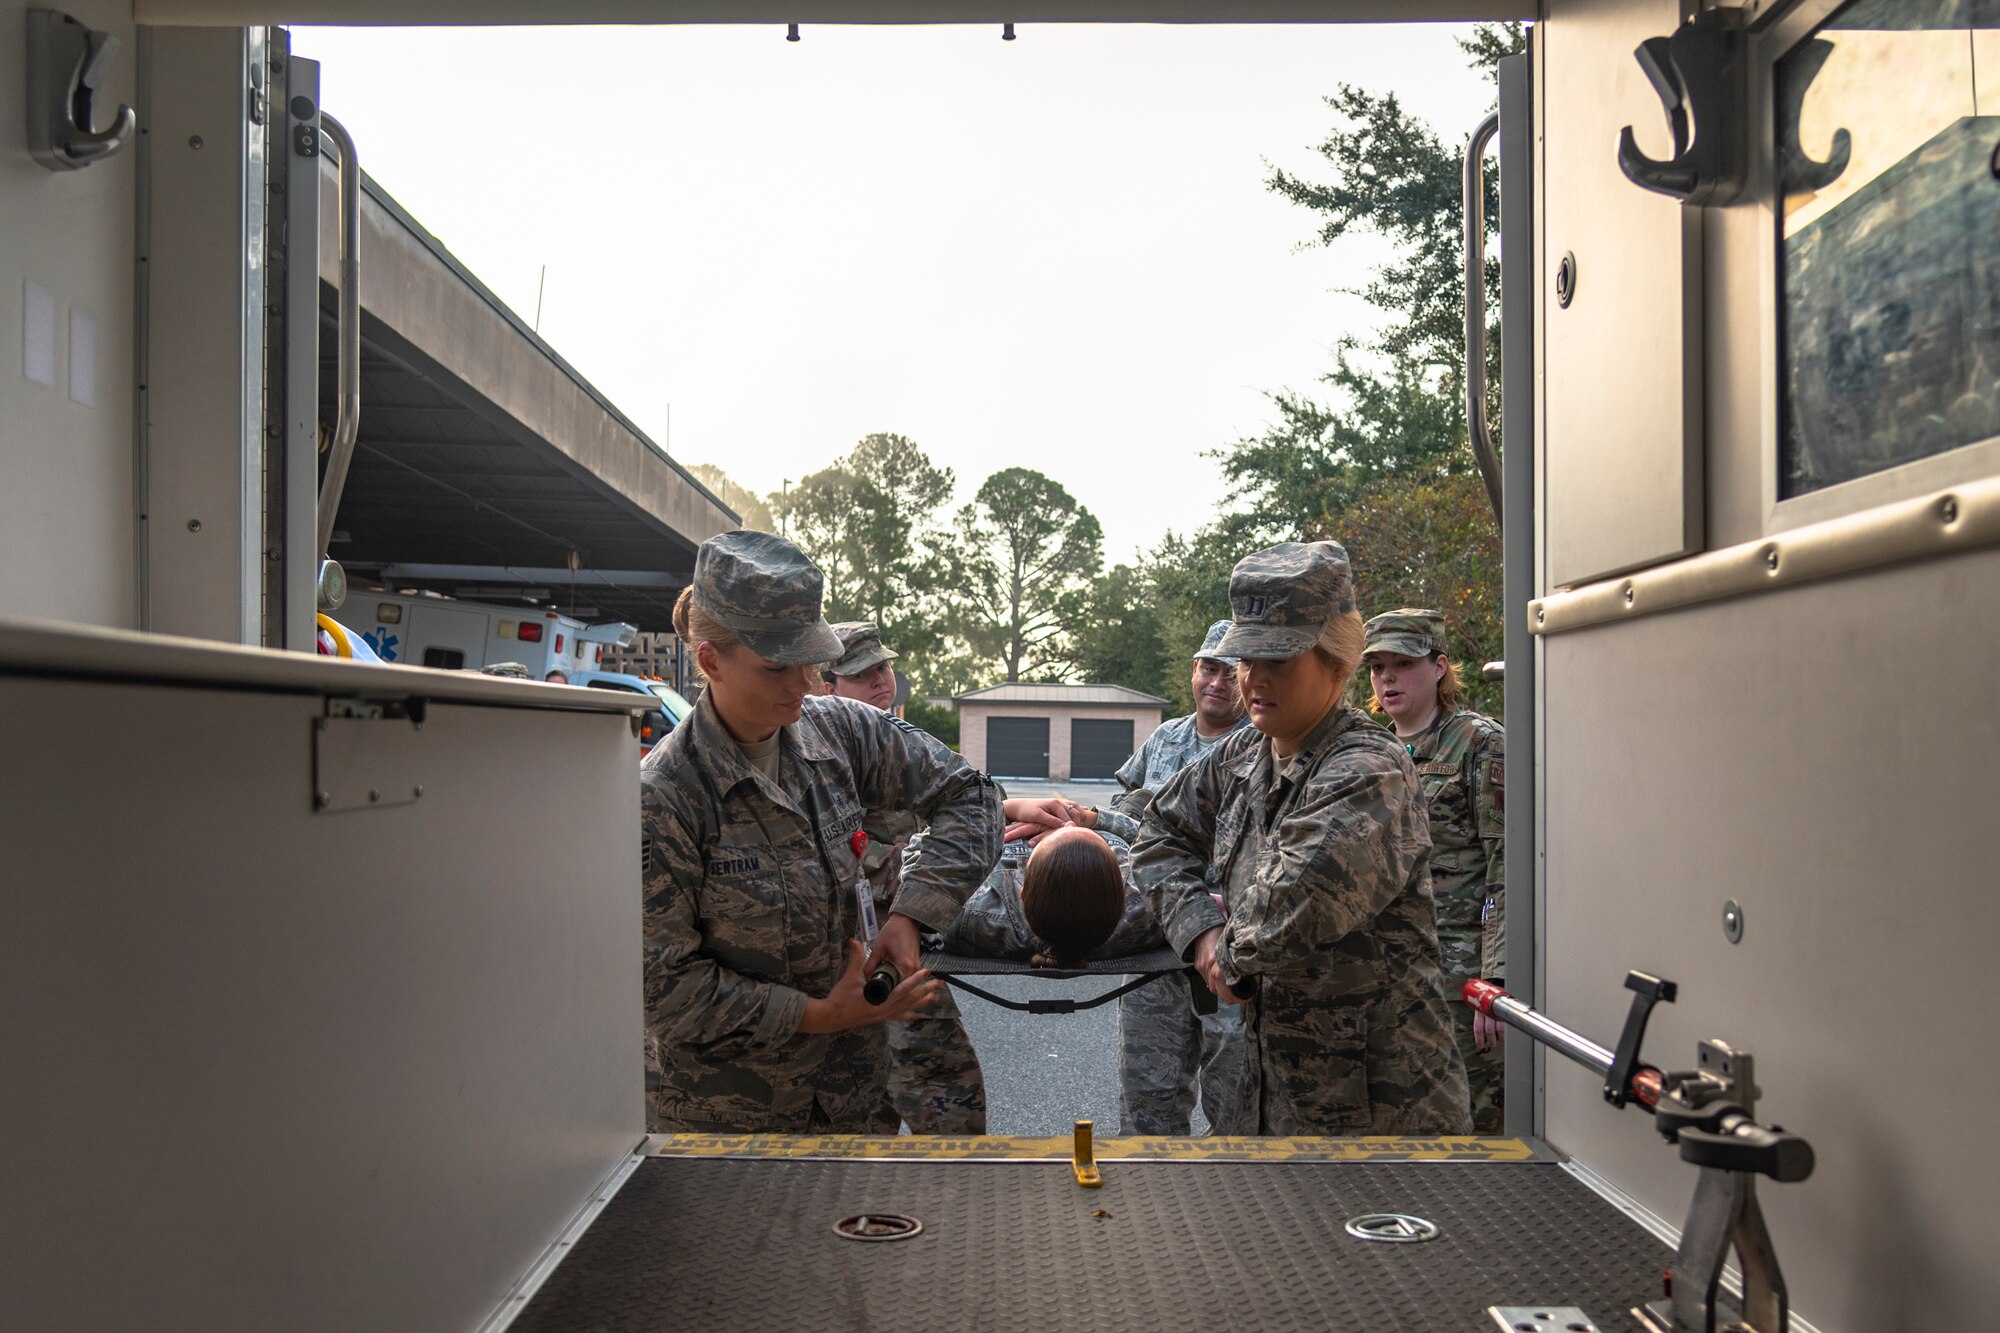 Airmen with the 23d Medical Group (MDG) place a simulated patient in an ambulance during litter-carry training Oct. 25, 2019, at Moody Air Force Base, Ga. The 23d MDG conducted the training in preparation for the upcoming Thunder Over South Georgia Open House. Airmen practiced litter-carry movements and commands to ensure they have the appropriate skills in the case of an emergency. (U.S. Air Force photo by Airman 1st Class Taryn Butler)